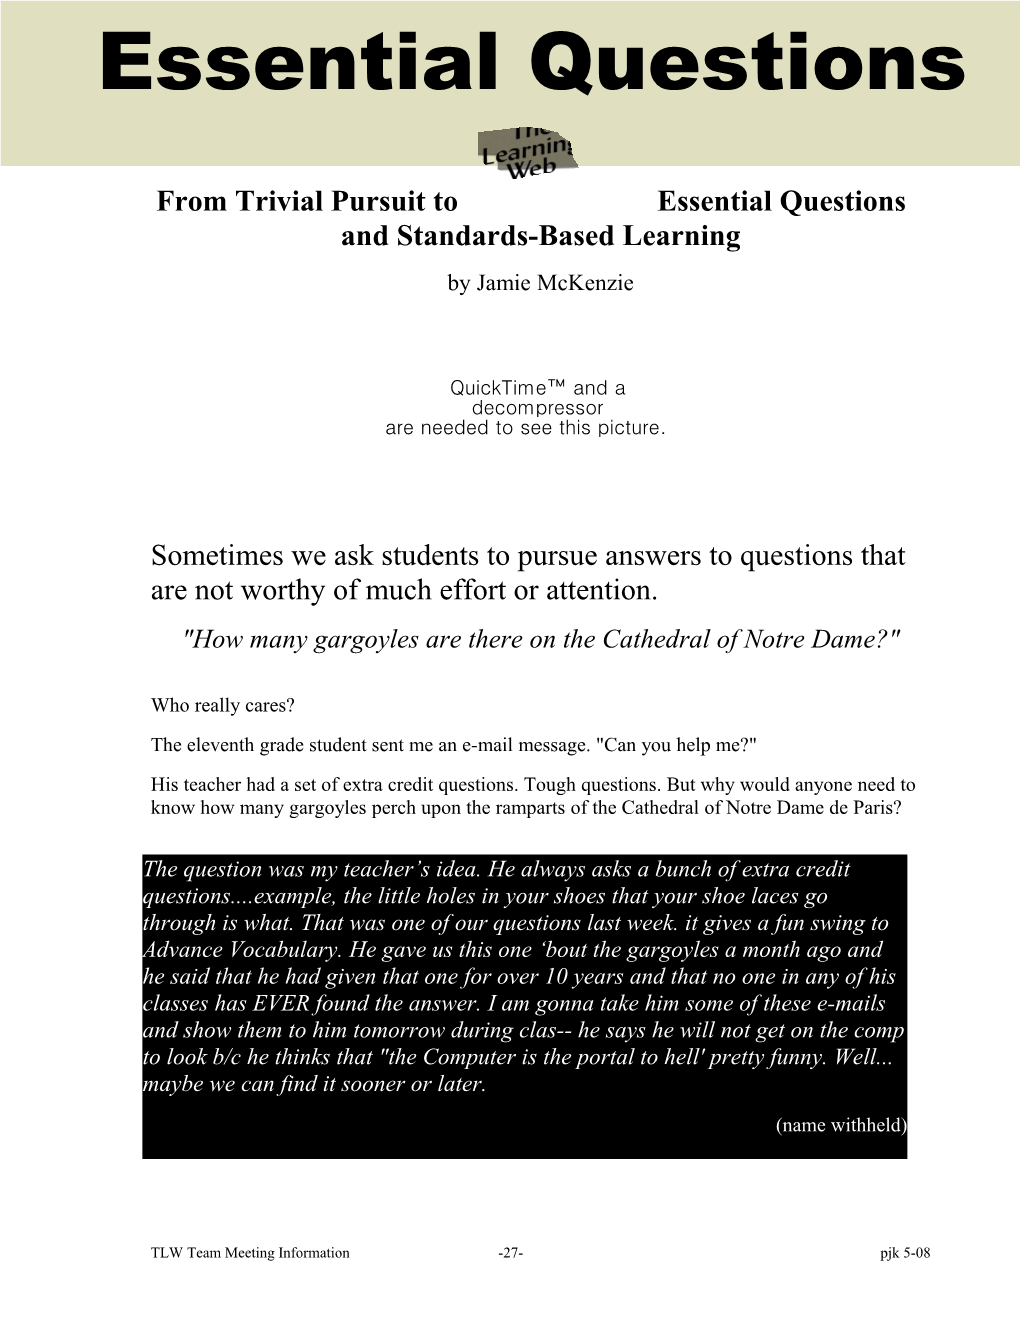 From Trivial Pursuit to Essential Questions and Standards-Based Learning